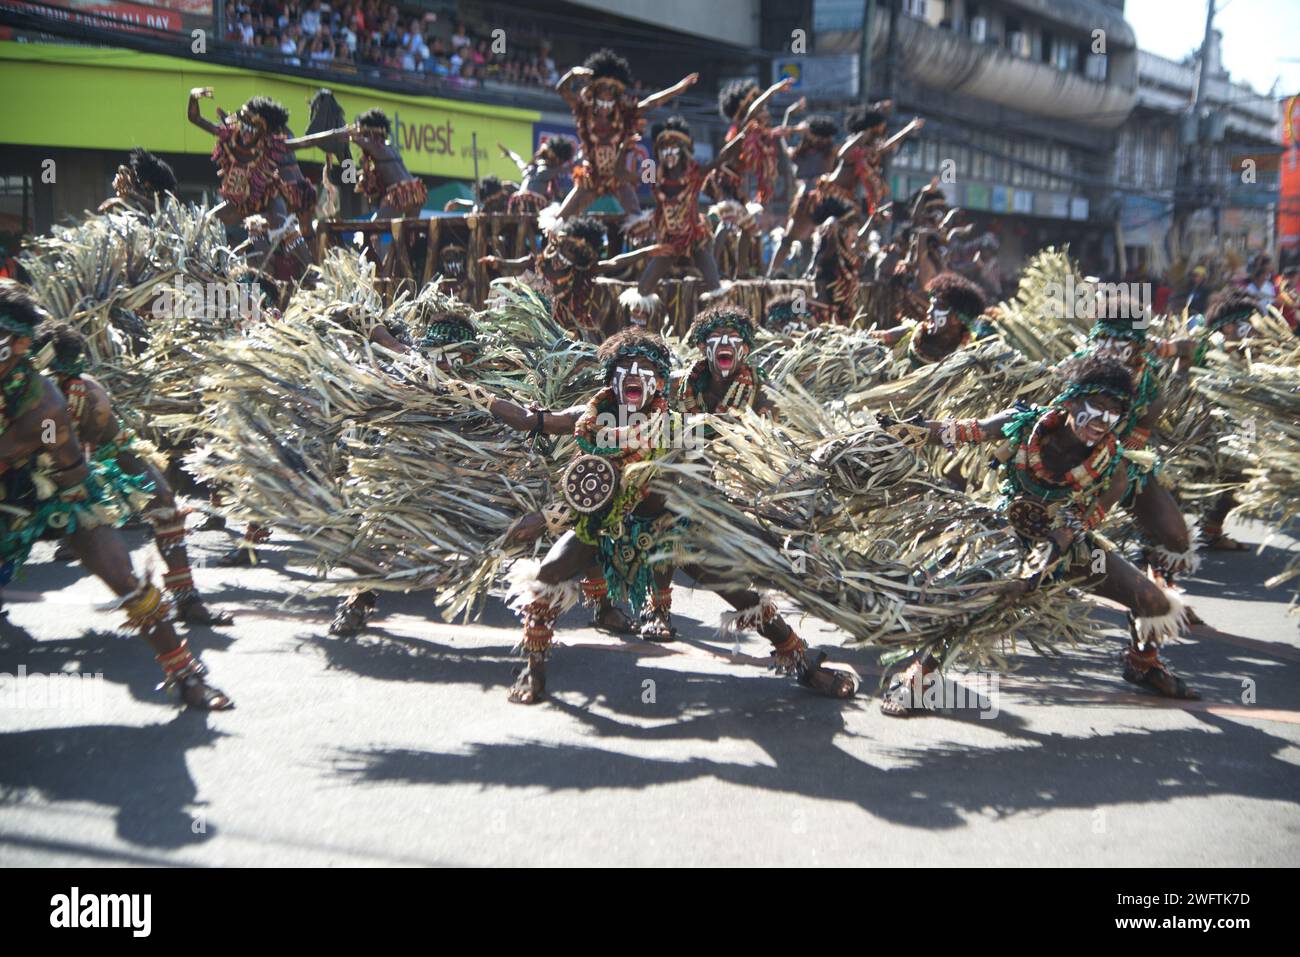 Participants Dinagyang festival.Dinagyang A religious and cultural festival held in honor of Santo Niño, this festival is considered a global festival. Stock Photo